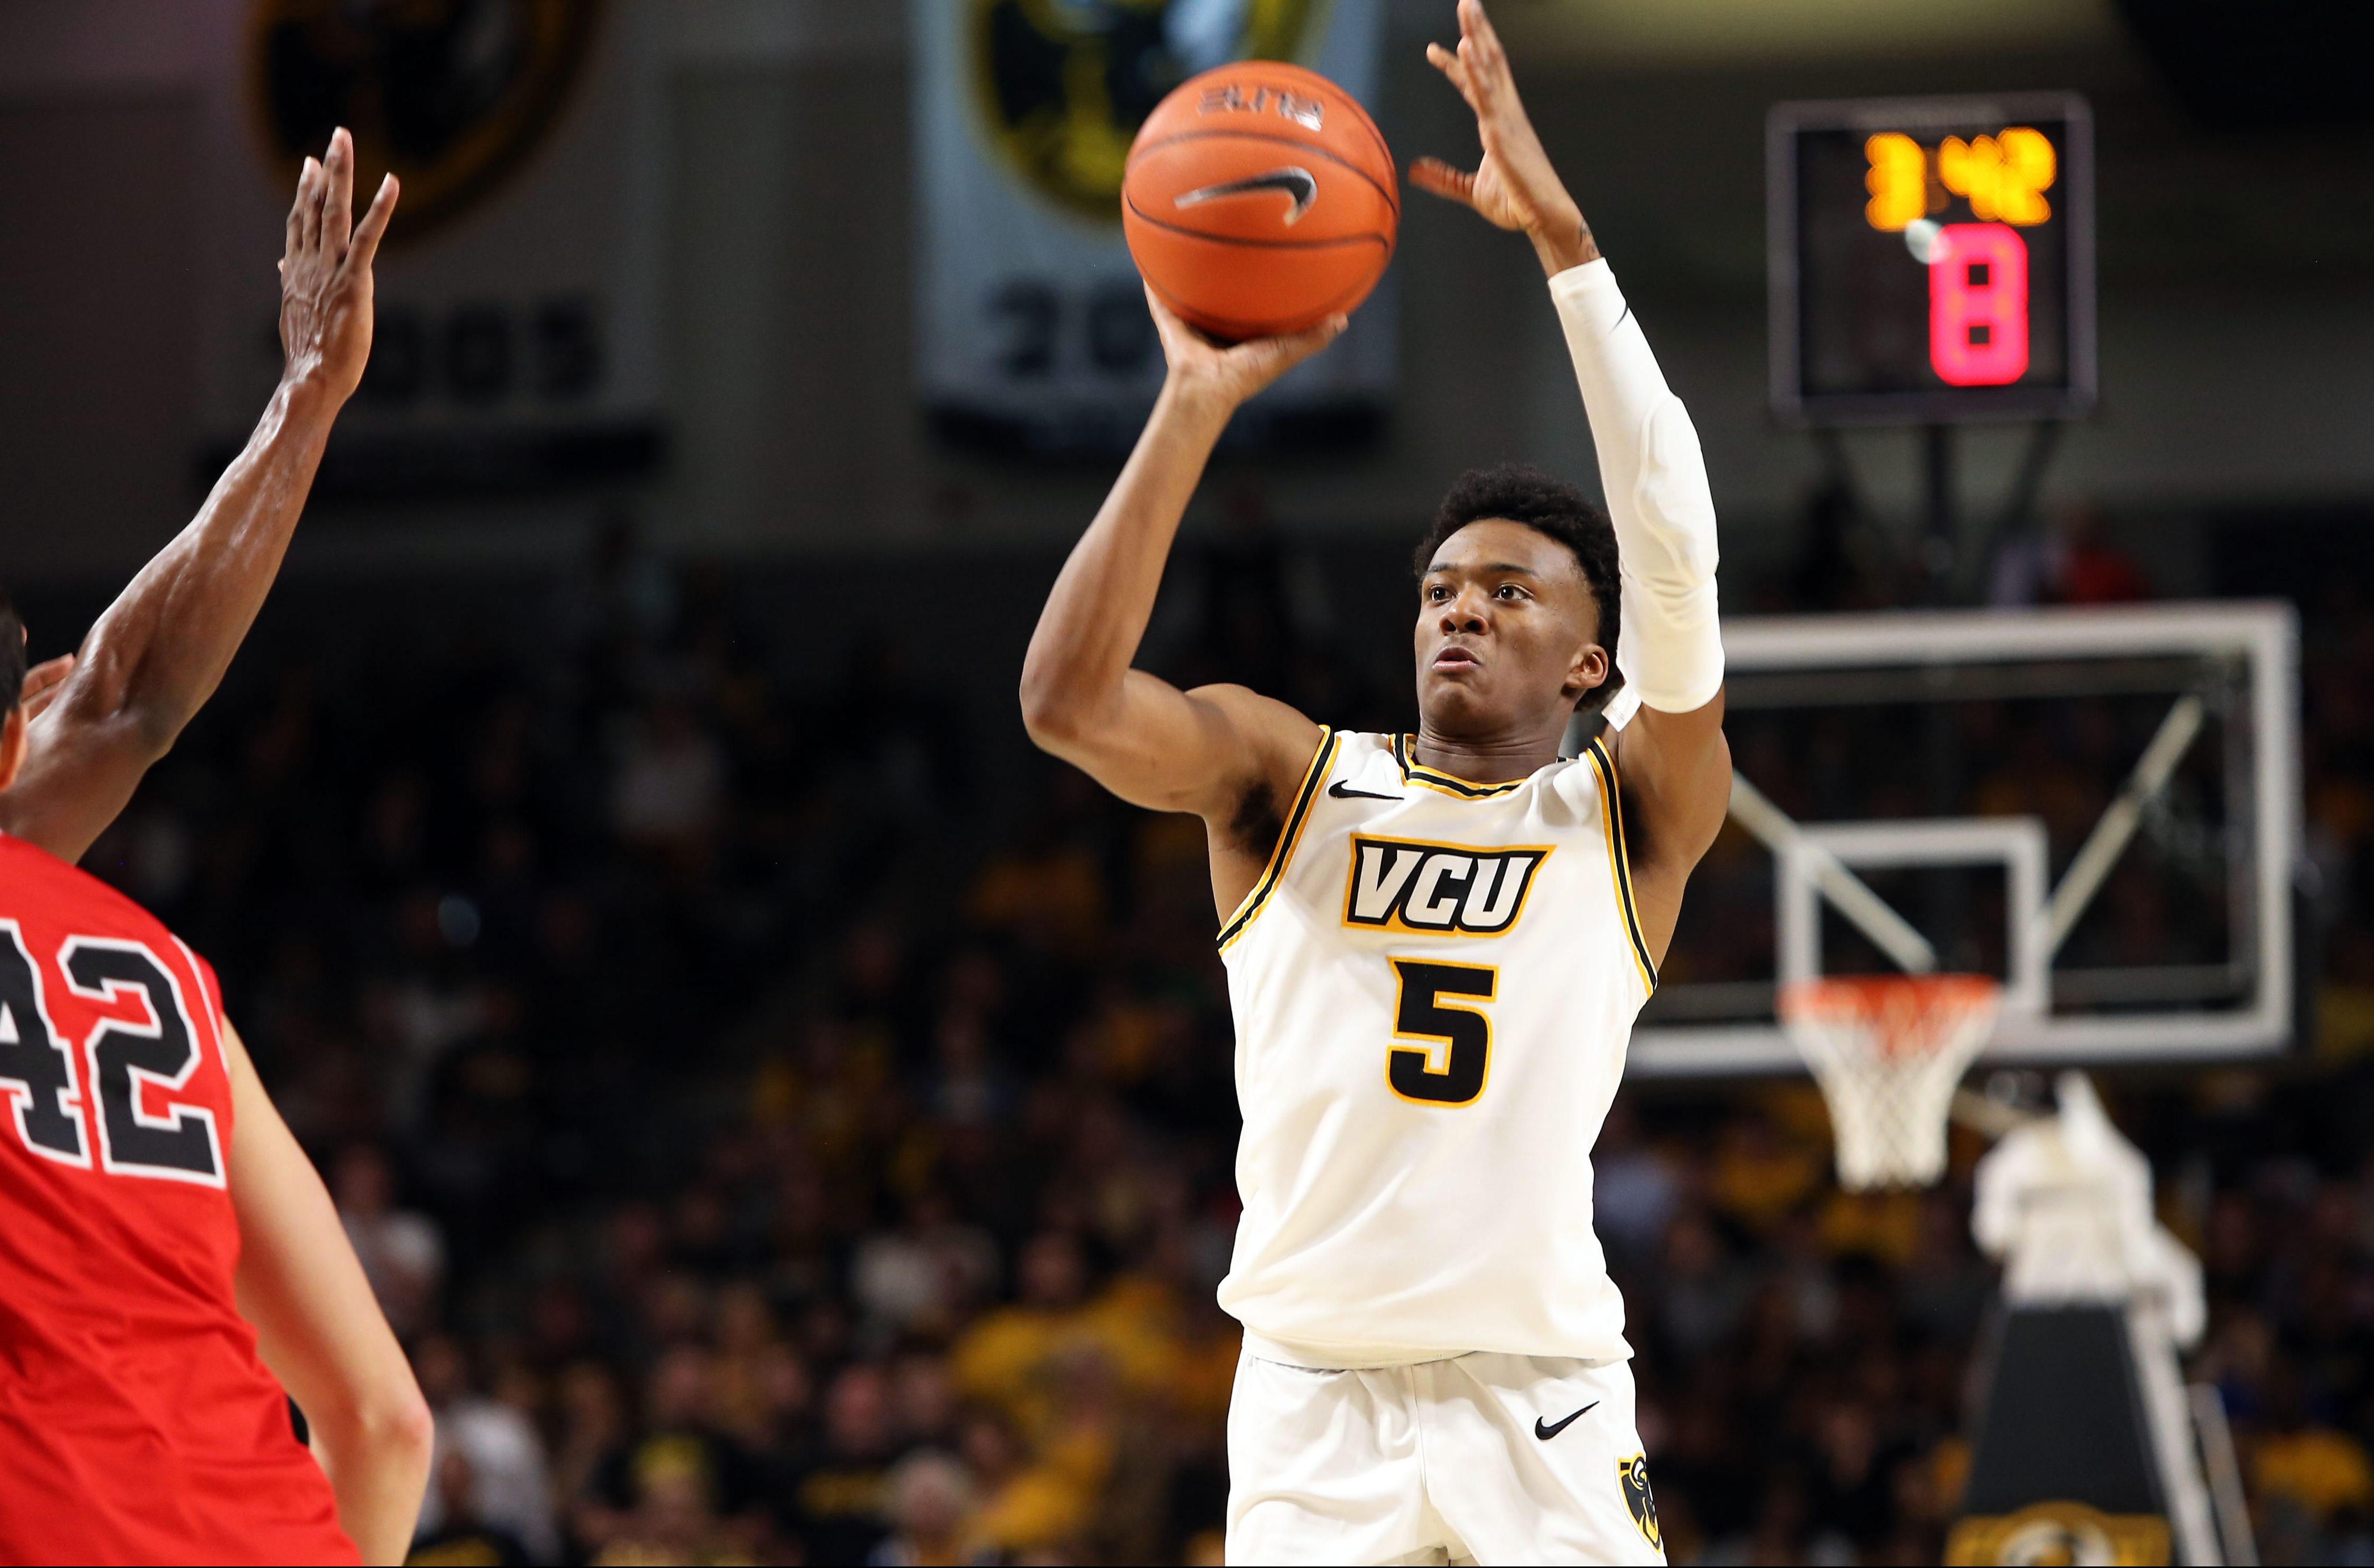 How To Watch VCU Vs North Texas Basketball Online